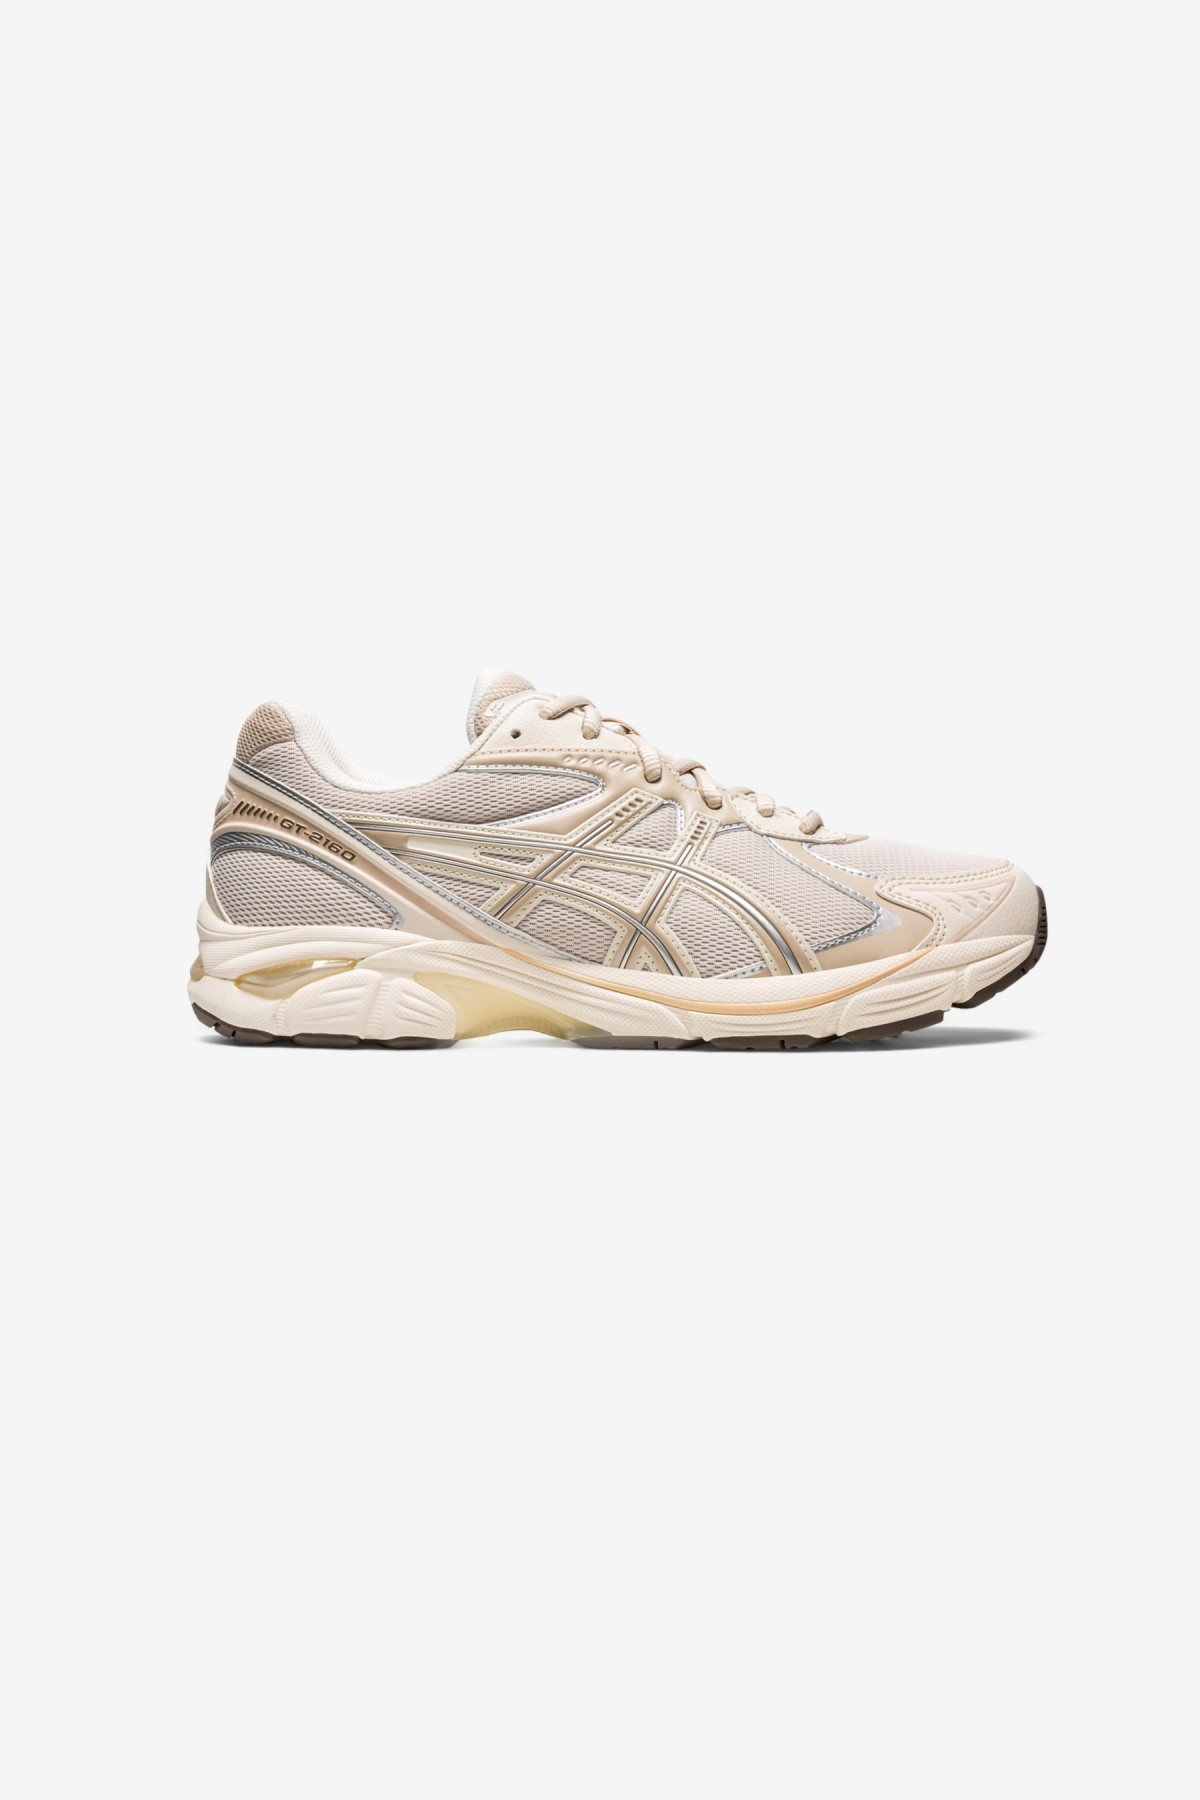 Asics GT-2160 in Oatmeal/Simply Taupe